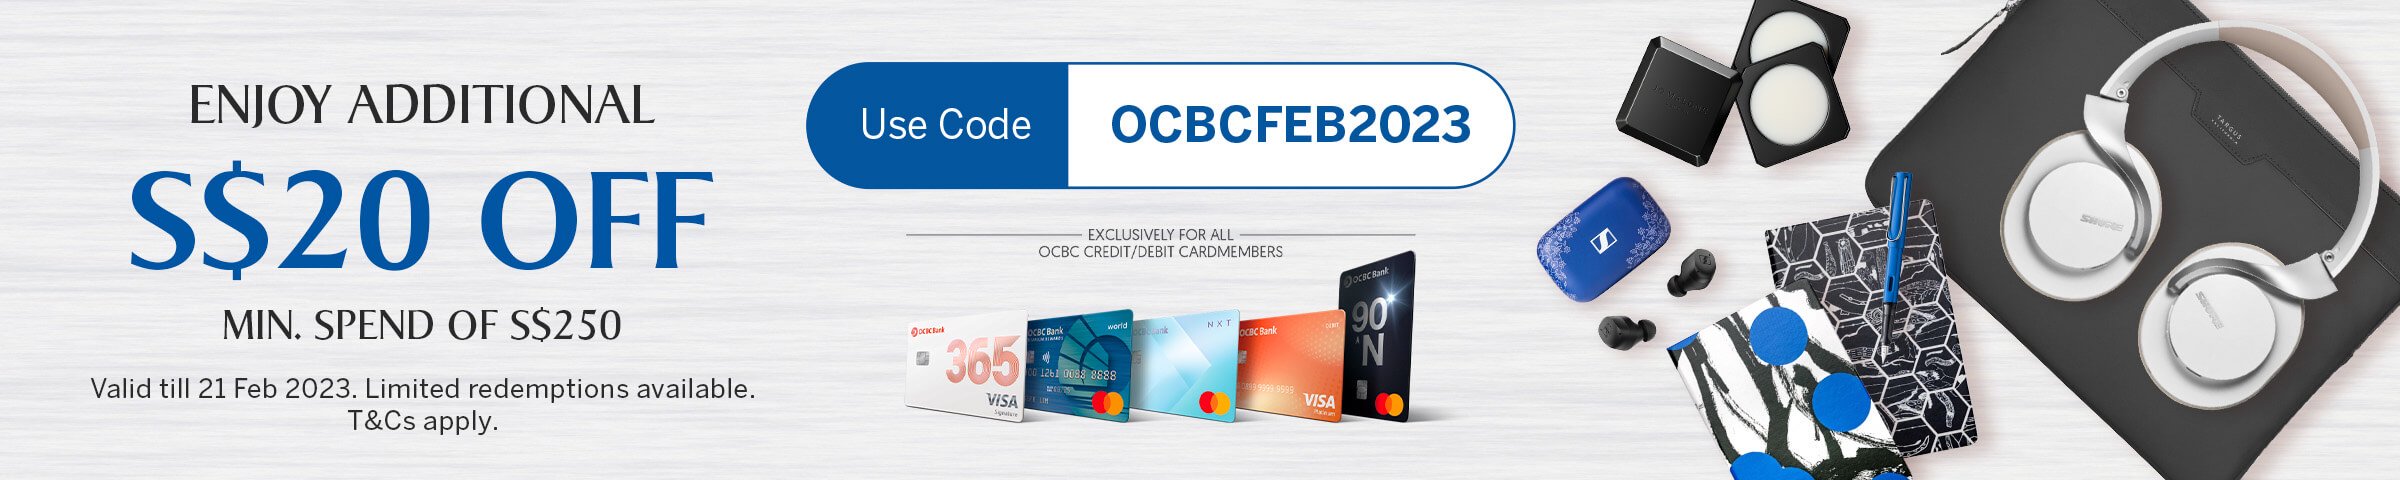 Exclusive Offer For OCBC Debit/Credit Cardmembers